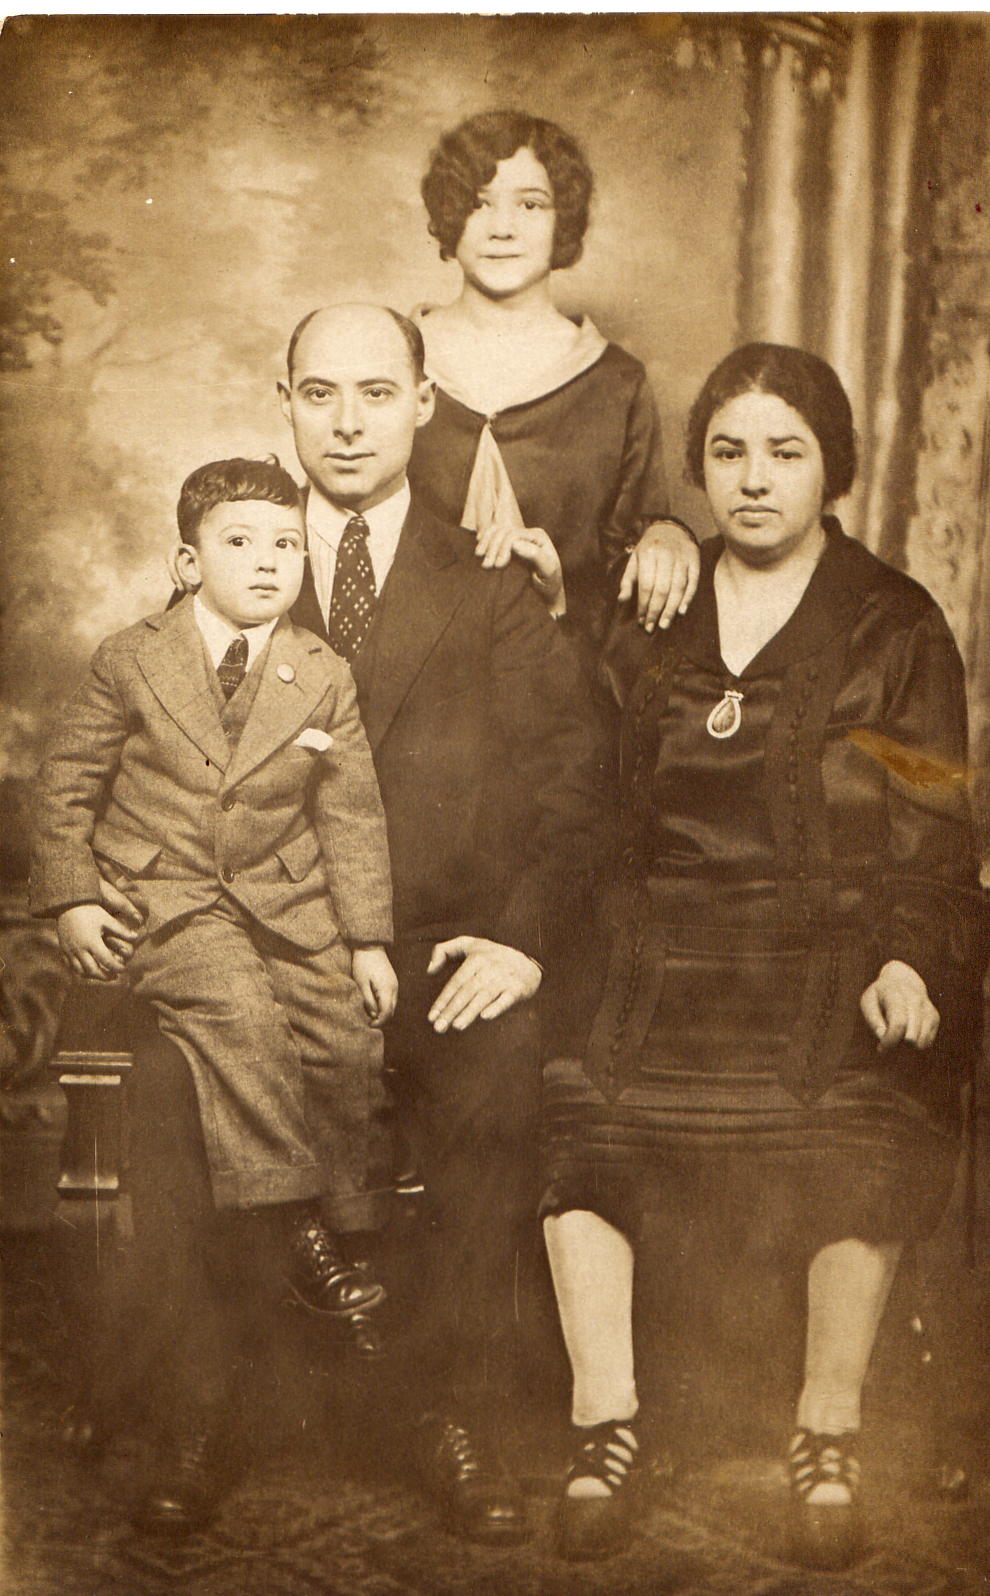 Tillie and Henry Gelb with their children, Arthur and Frances.